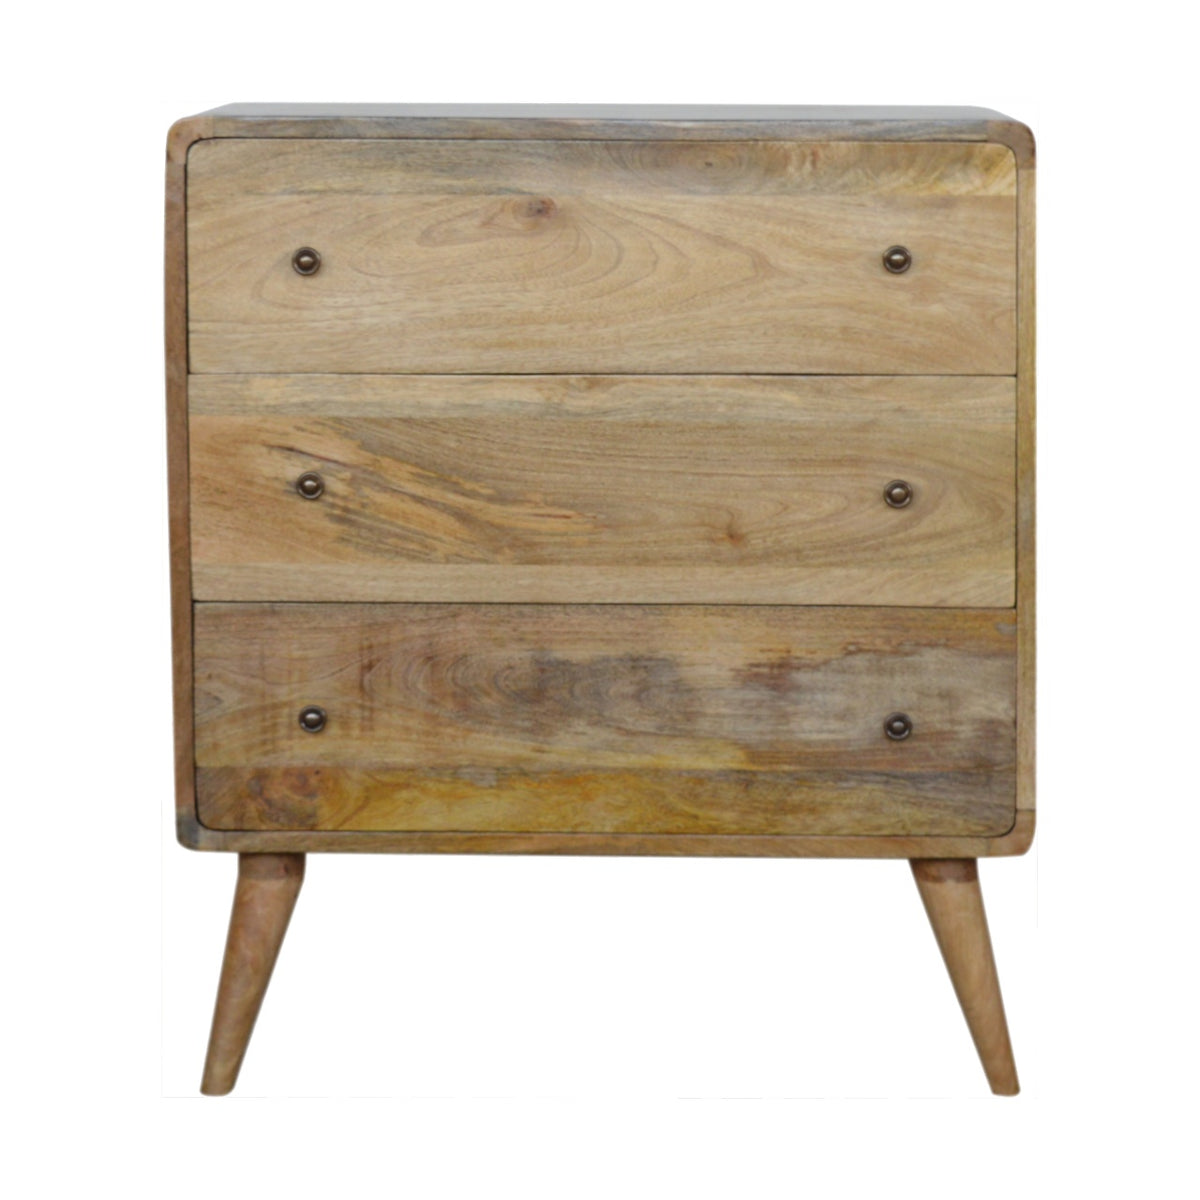 solid wood chest of drawers for sale uk mango wood sw17 sw16 se15 se16 se17 w9 w5 w6 London chest of drawers